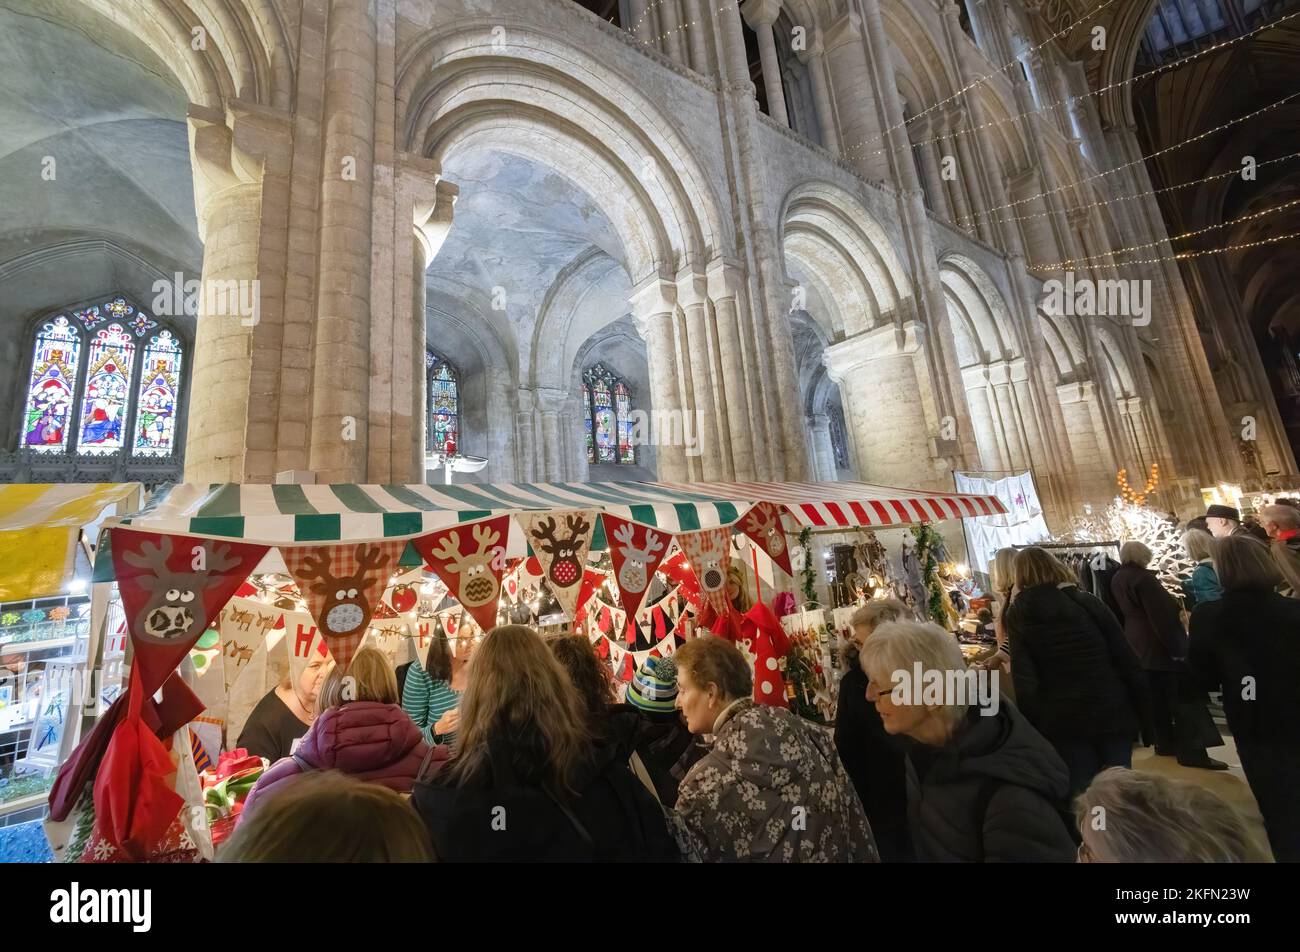 Ely Cathedral Christmas fair - people shopping at food and gift market stalls at Xmas, inside the cathedral, Ely Cambridgeshire UK Stock Photo